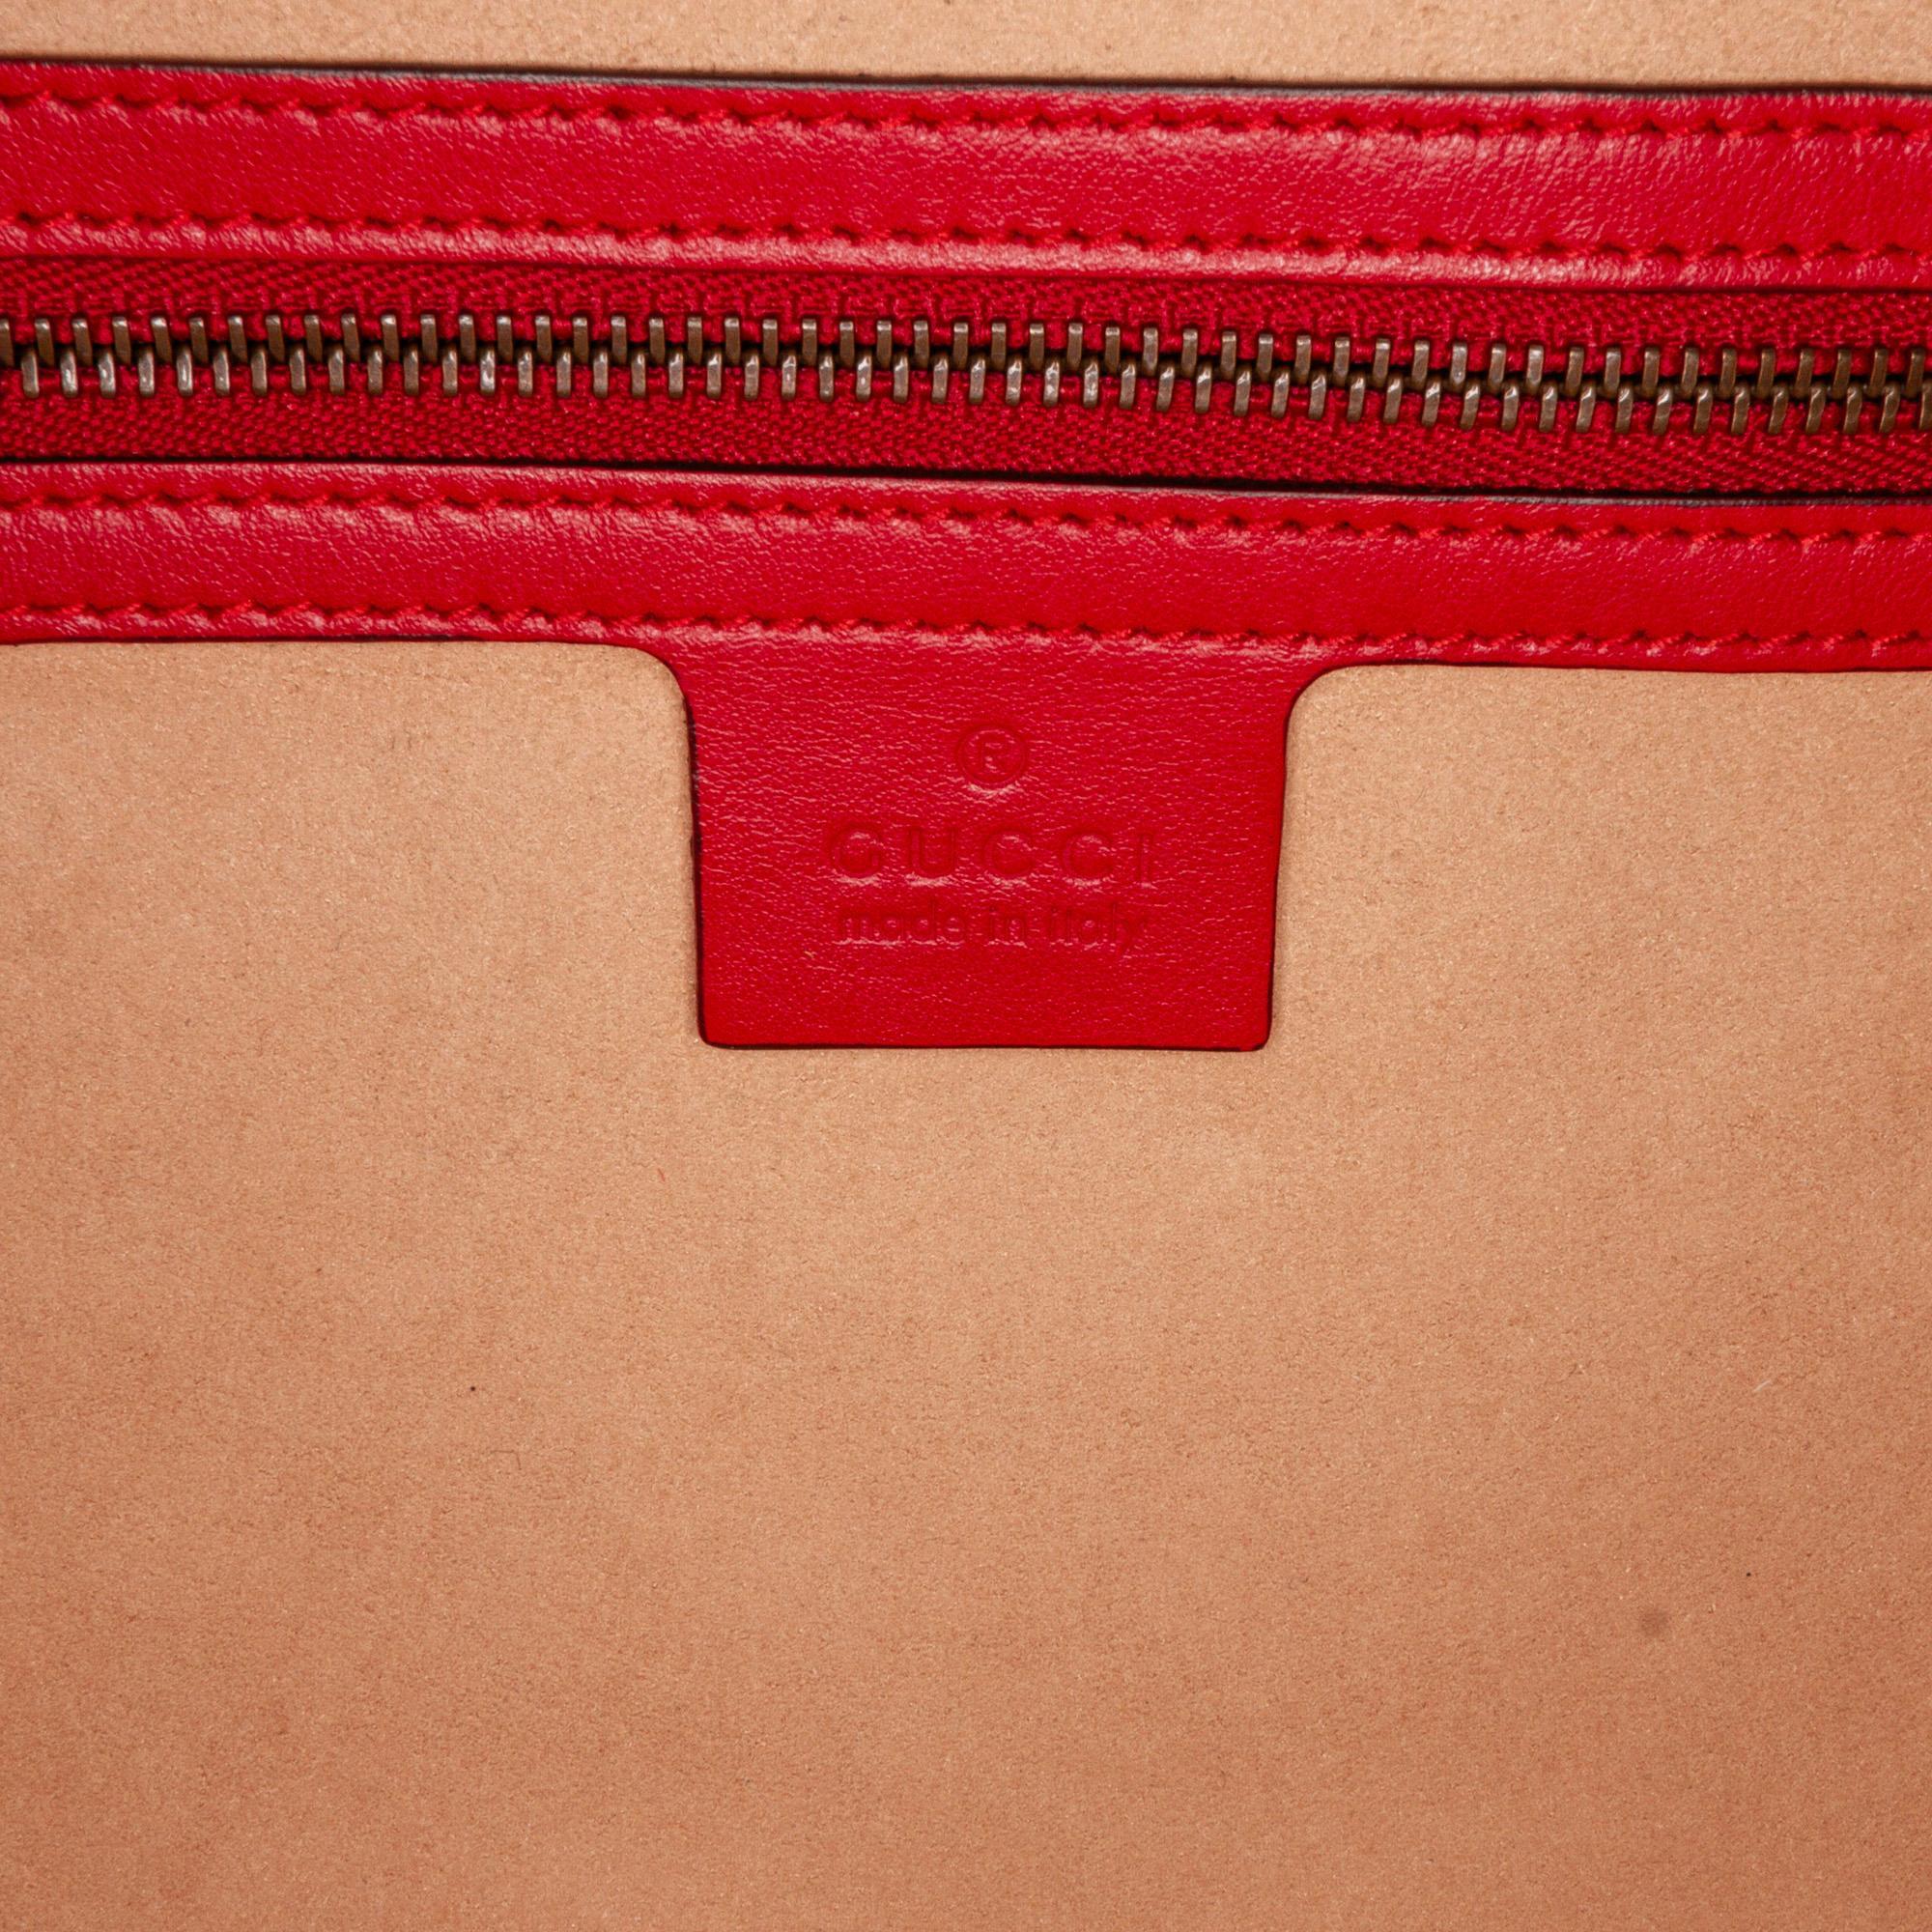 Gucci Red Small GG Marmont Matelasse Top Handle